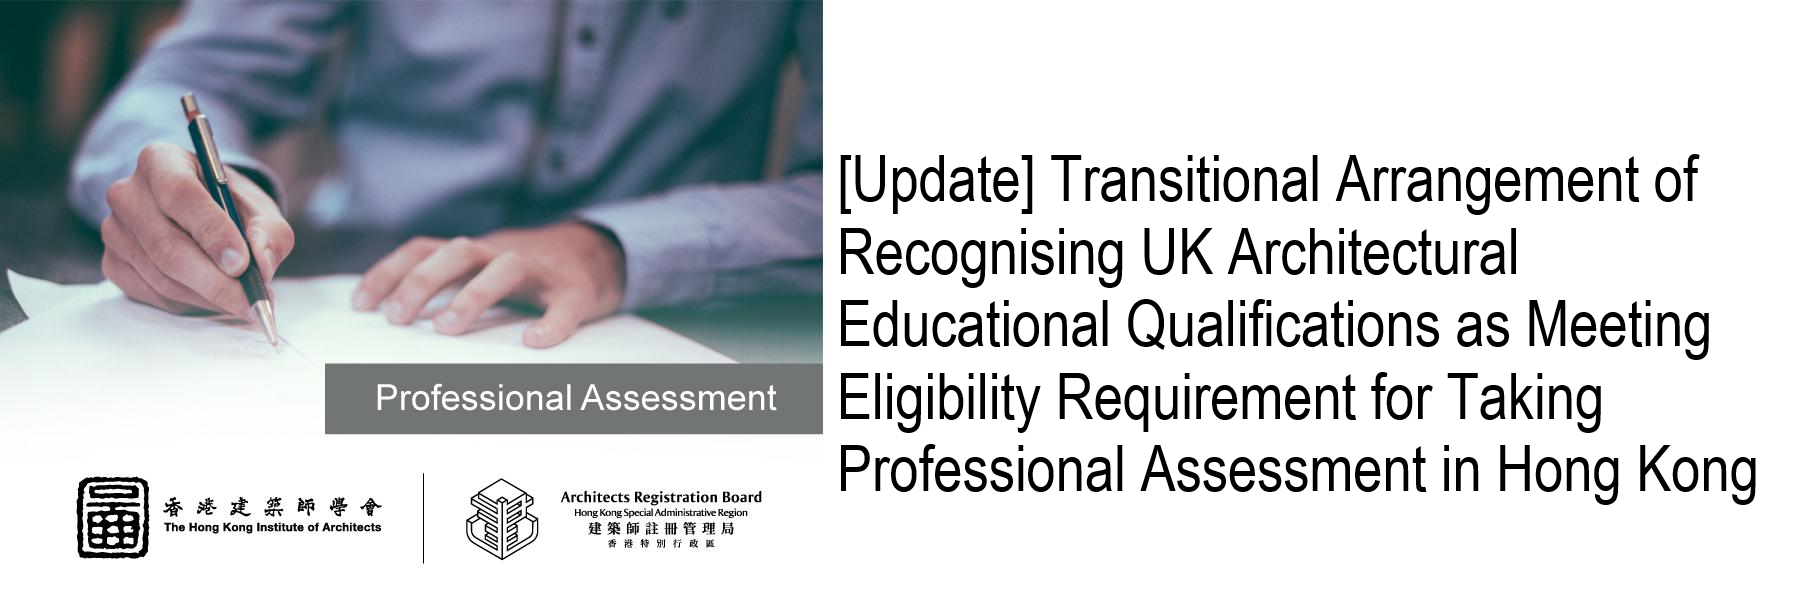 [Update] Transitional Arrangement of Recognising UK Architectural Educational Qualifications as Meeting Eligibility Requirement for Taking Professional Assessment in Hong Kong